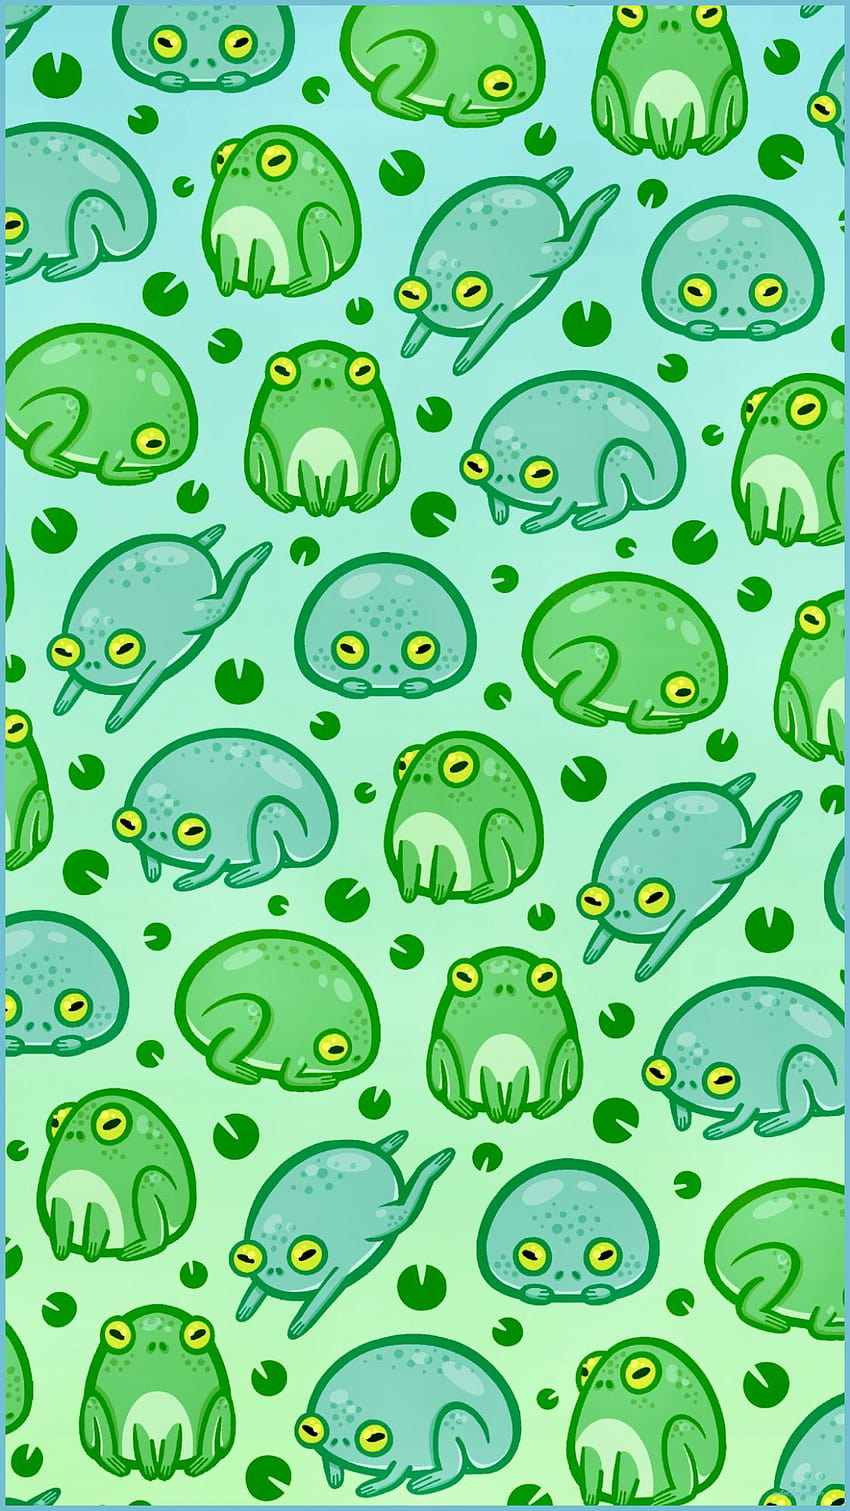 A green frog pattern with many different colored eyes - Aqua, frog